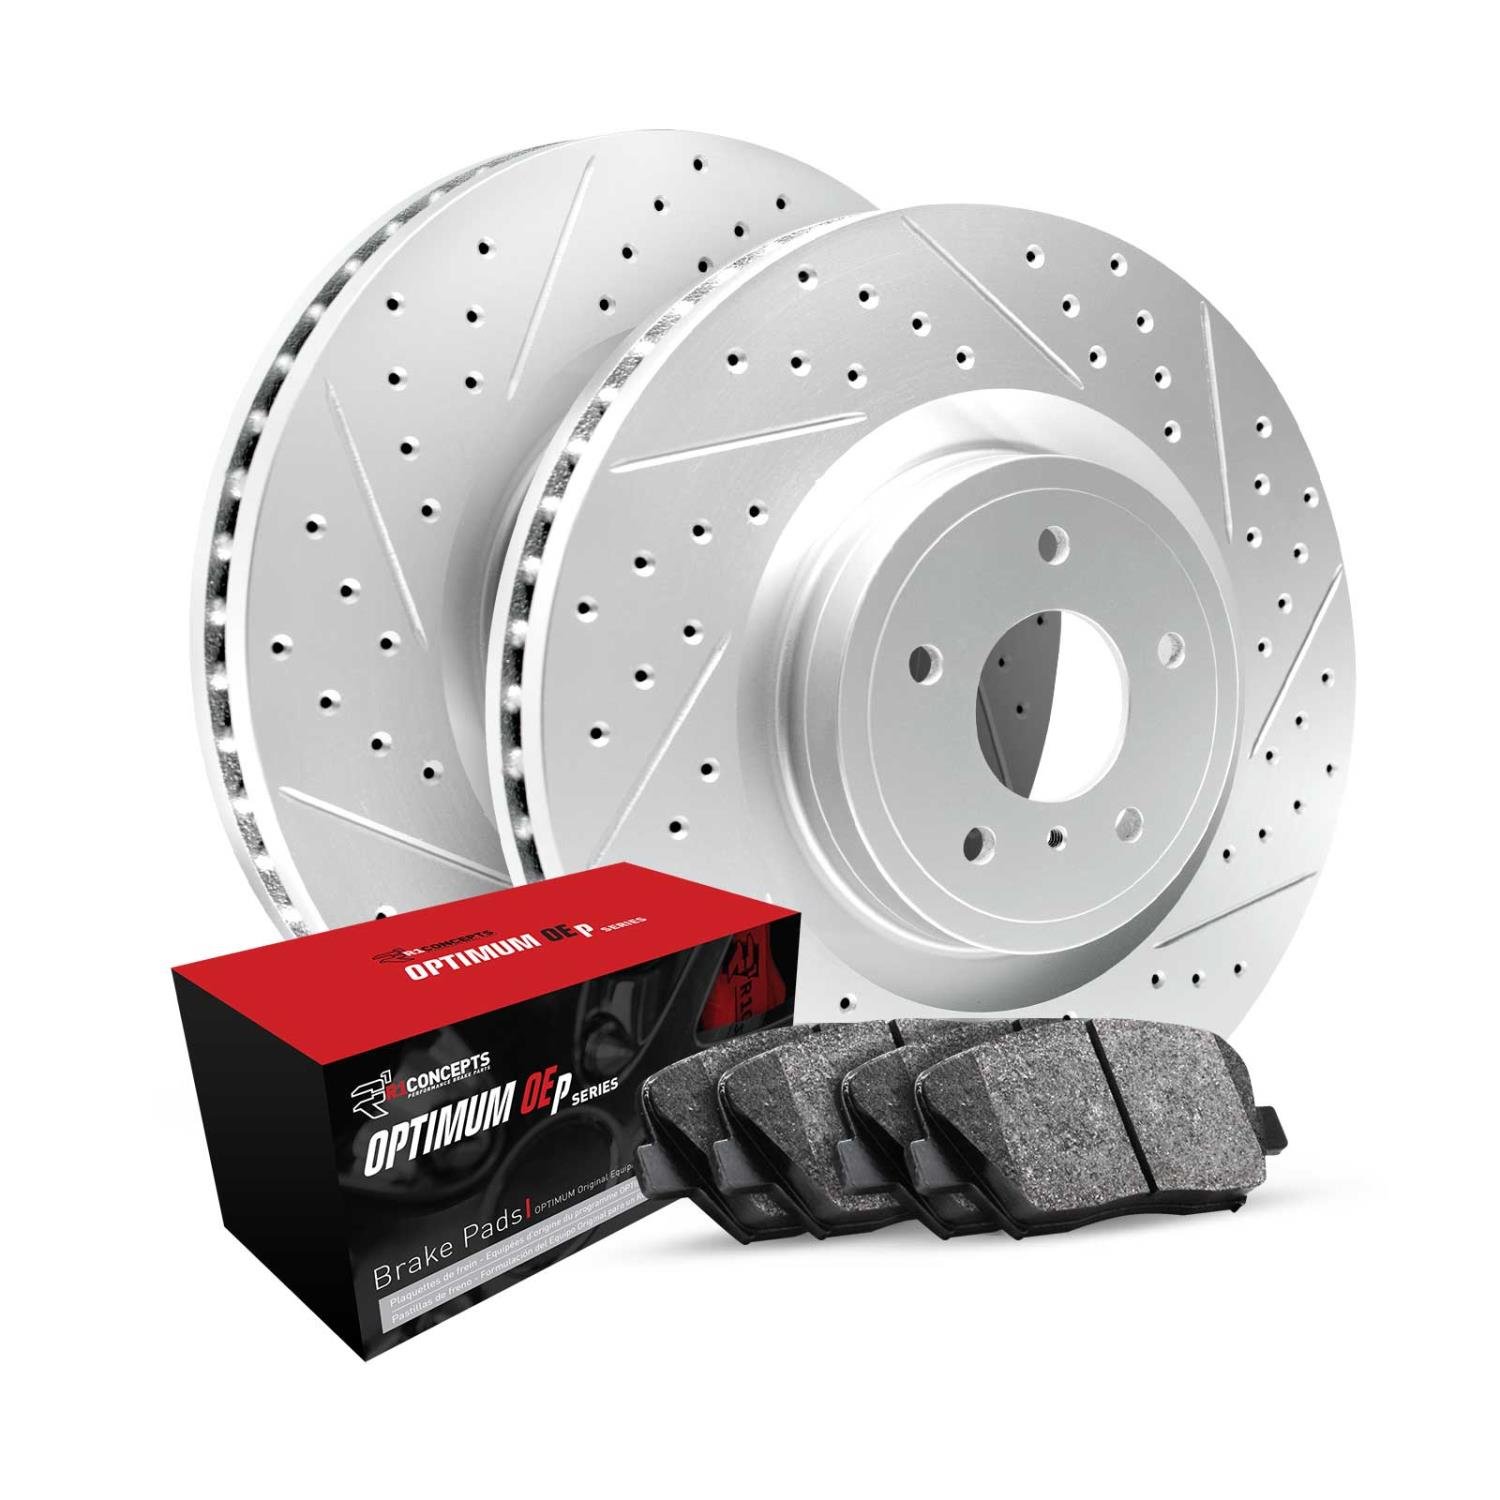 GEO-Carbon Drilled & Slotted Brake Rotor Set w/Optimum OE Pads, Fits Select Infiniti/Nissan, Position: Front